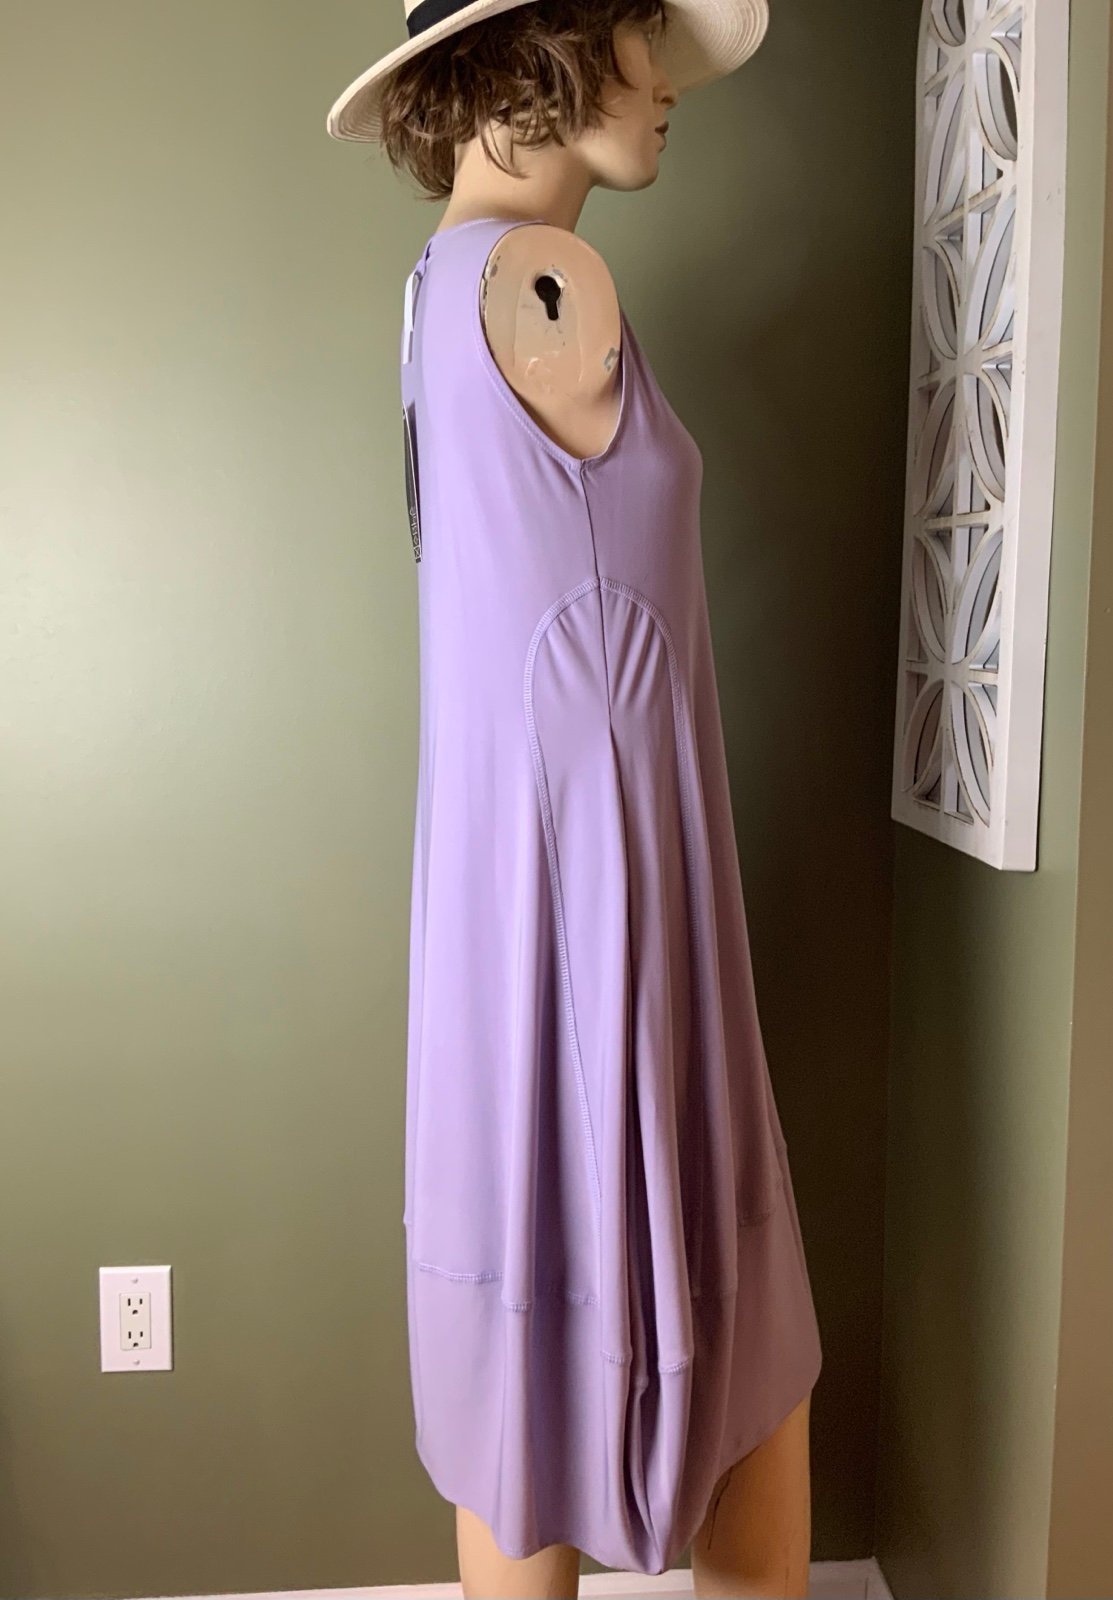 Popular Marla Wynne lavender dress brand new with tags xs super comfortable NKdblpoeh well sale